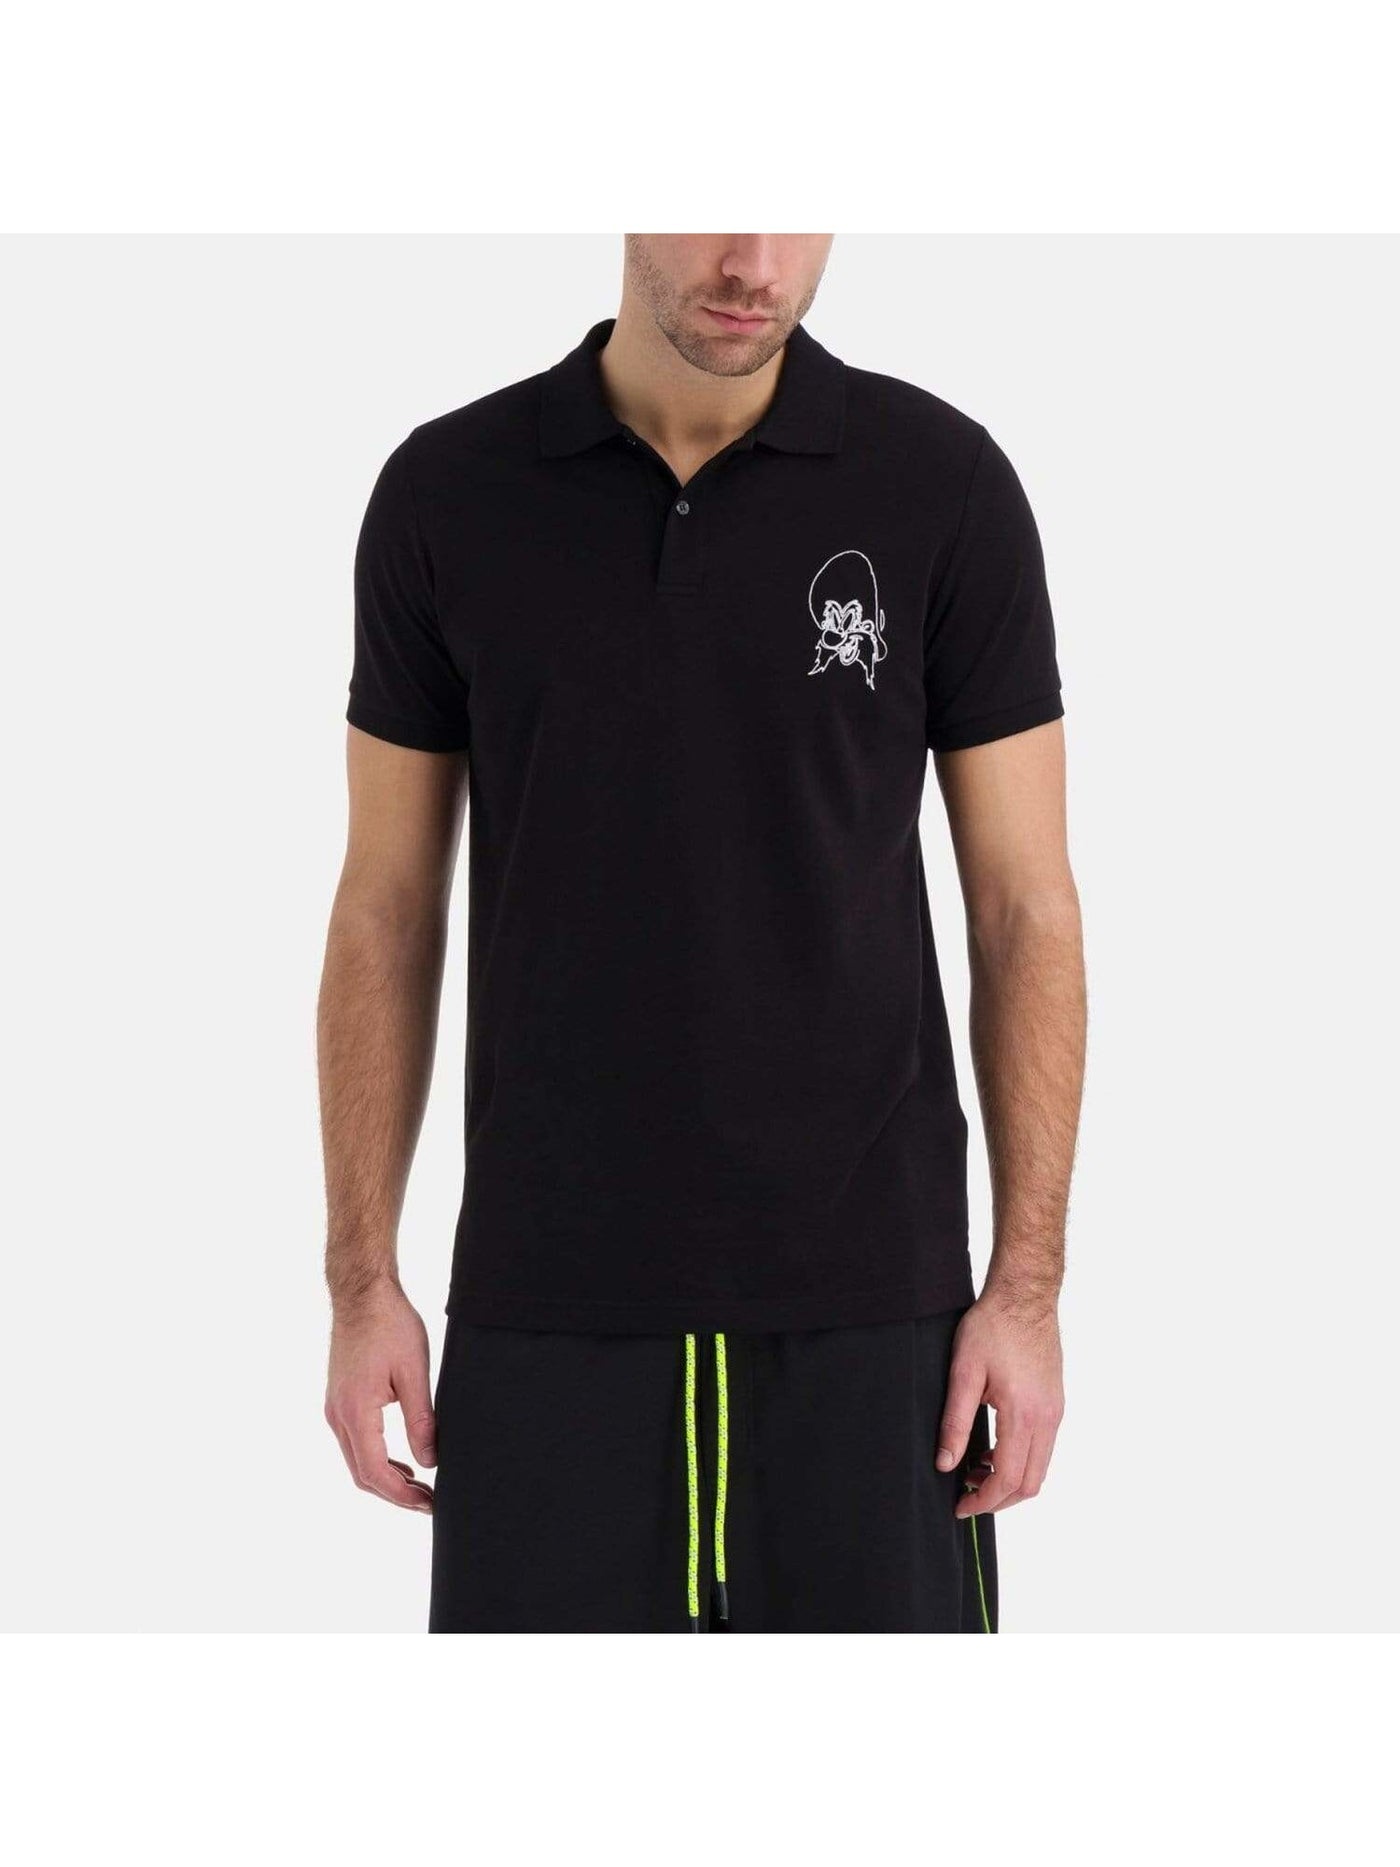 ICEBERG Mens Black Short Sleeve Classic Fit Stretch Polo S